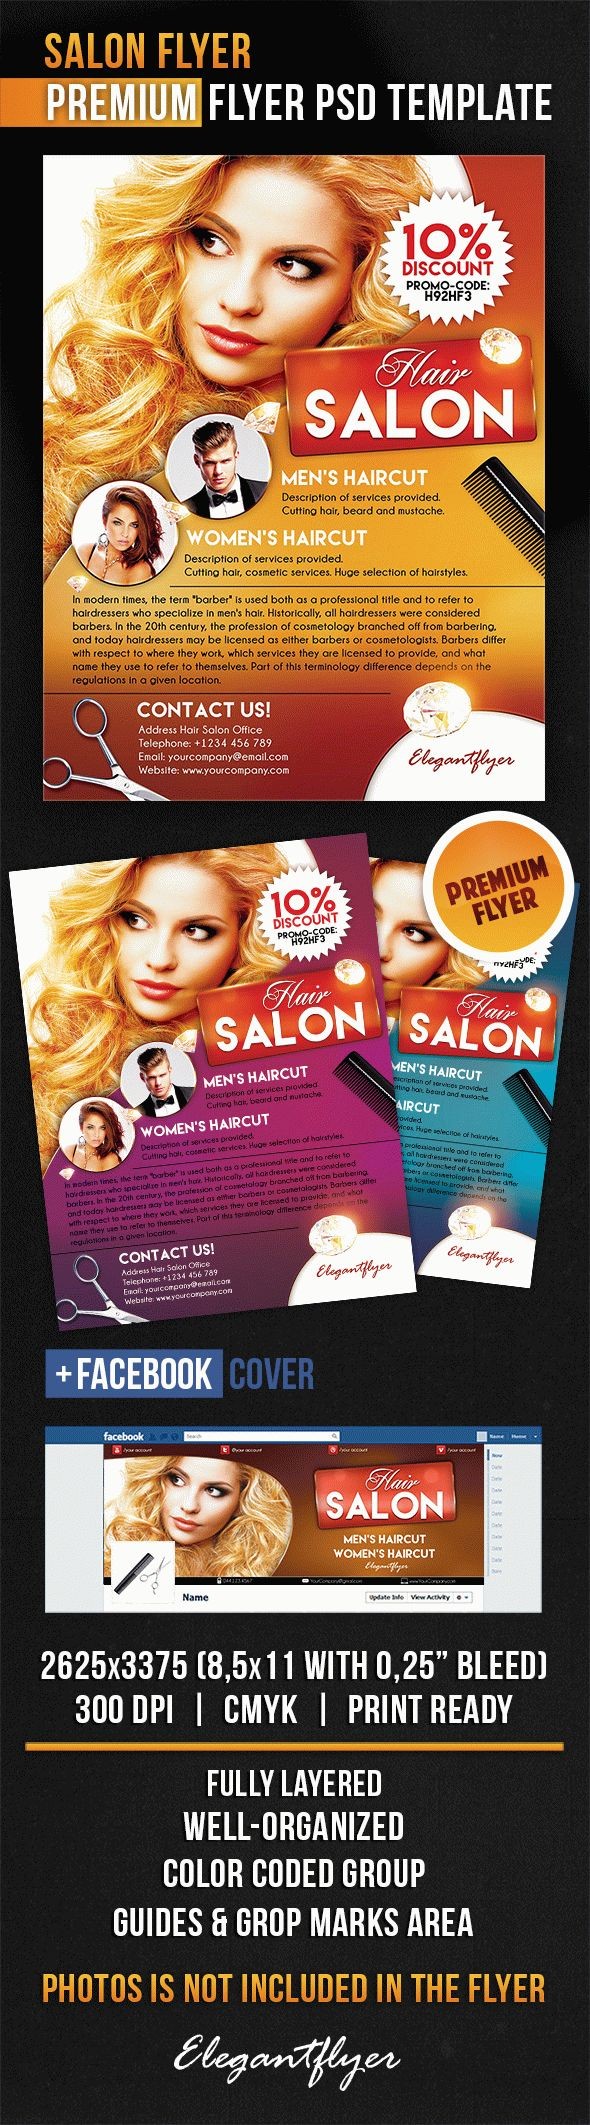 Salon Flyer remains unchanged when translated into German. by ElegantFlyer